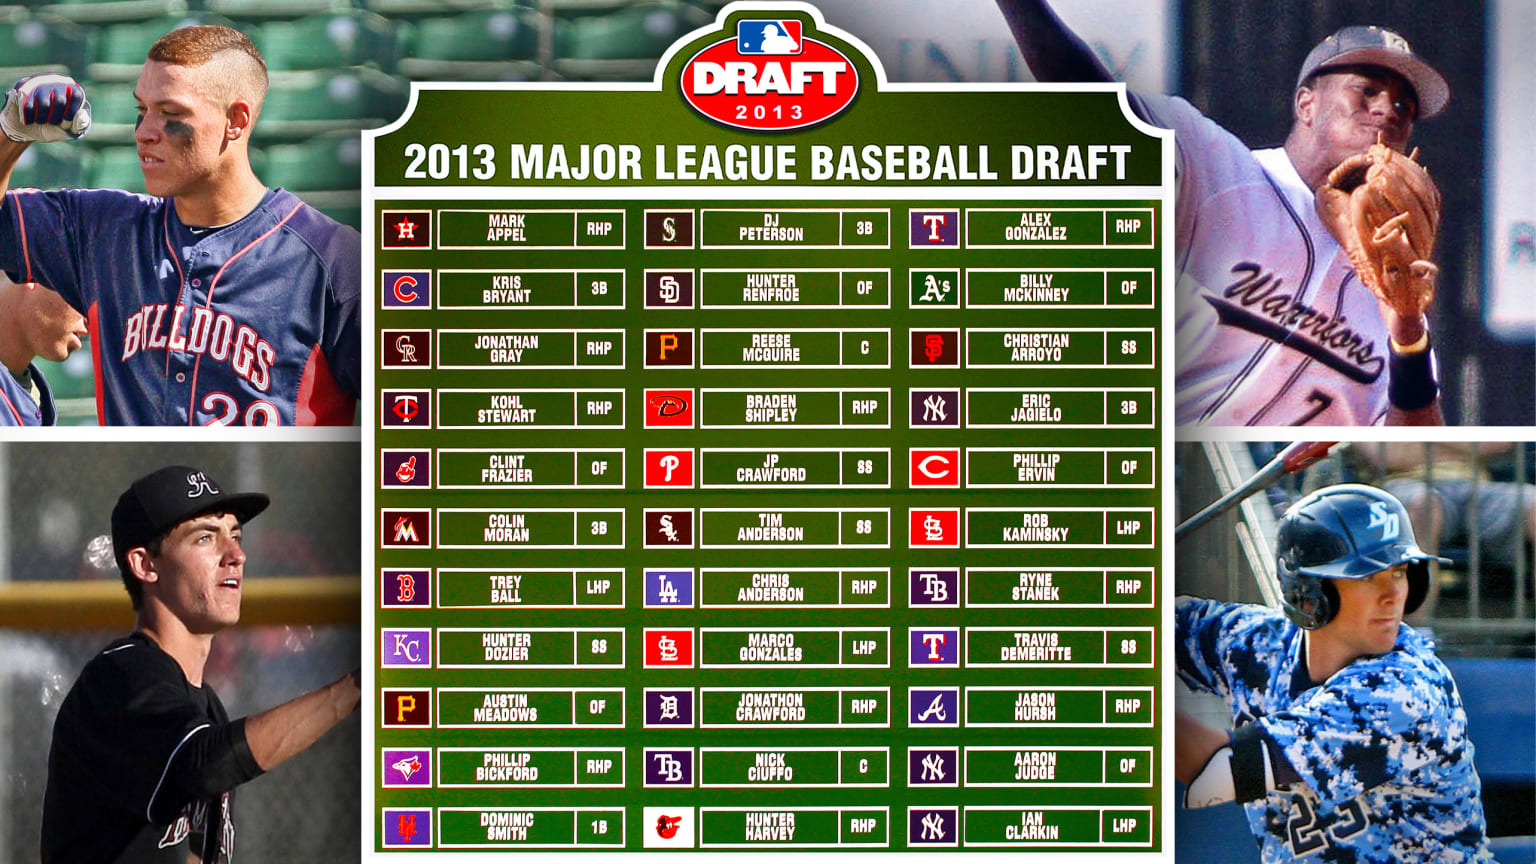 A Draft board with the first-round picks from 2013, with images of two players on either side